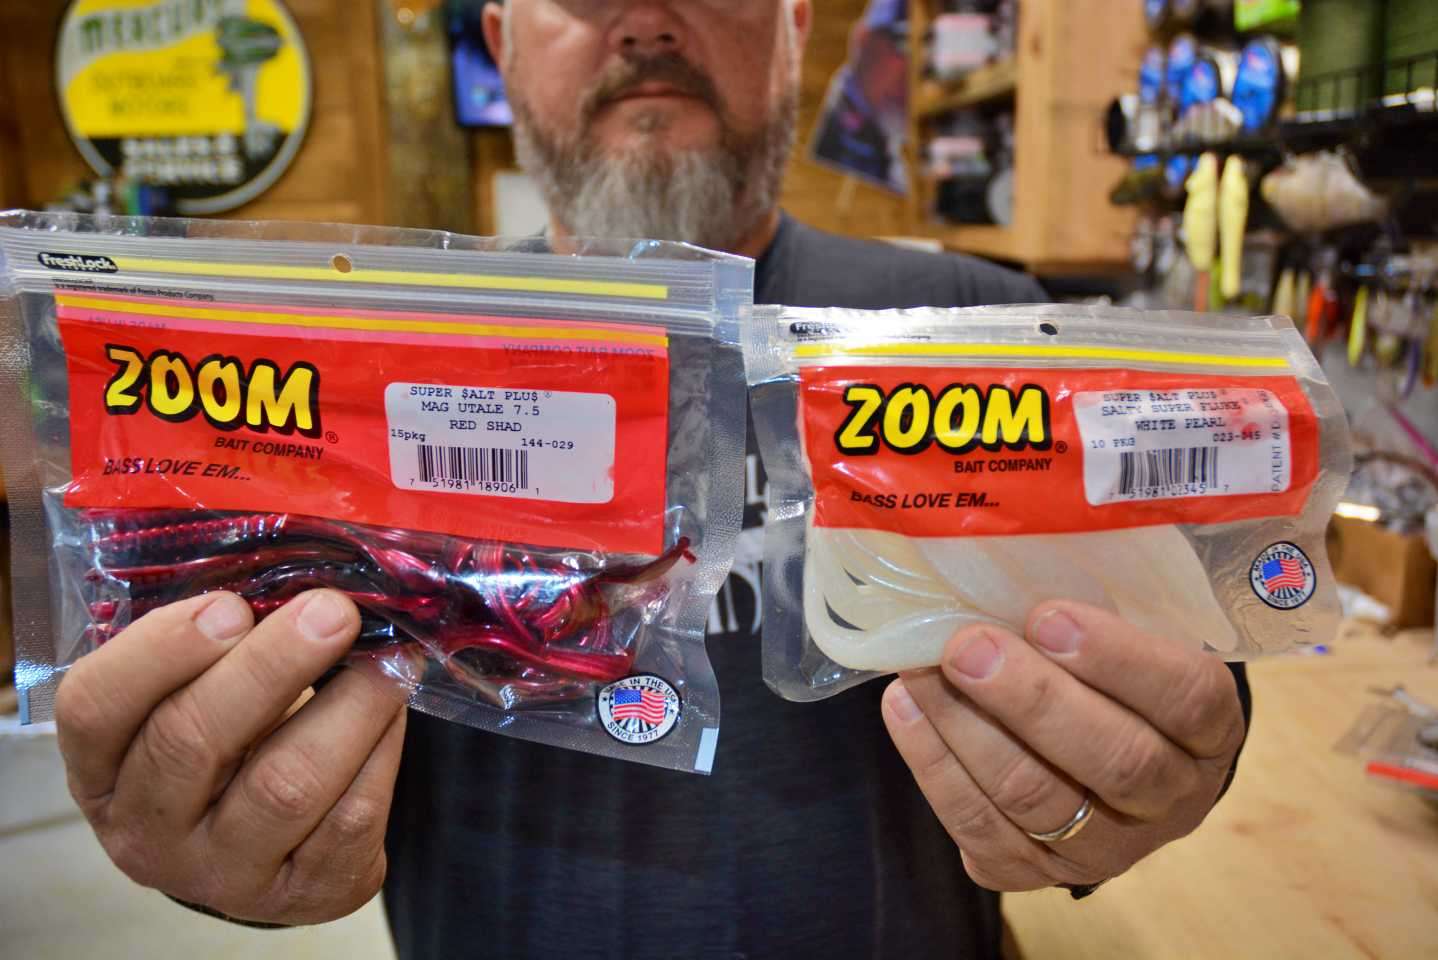 The new Zoom Super Salt Plus U-Tail Worm is his all-around choice, as it gives the fish a different look, and it is impregnated with fish-attracting salts. The Zoom Super Salt Plus Salty Super Fluke is another versatile option. âYou can fish it on top, weightless, or use it on a Carolina rig in deeper water.â 